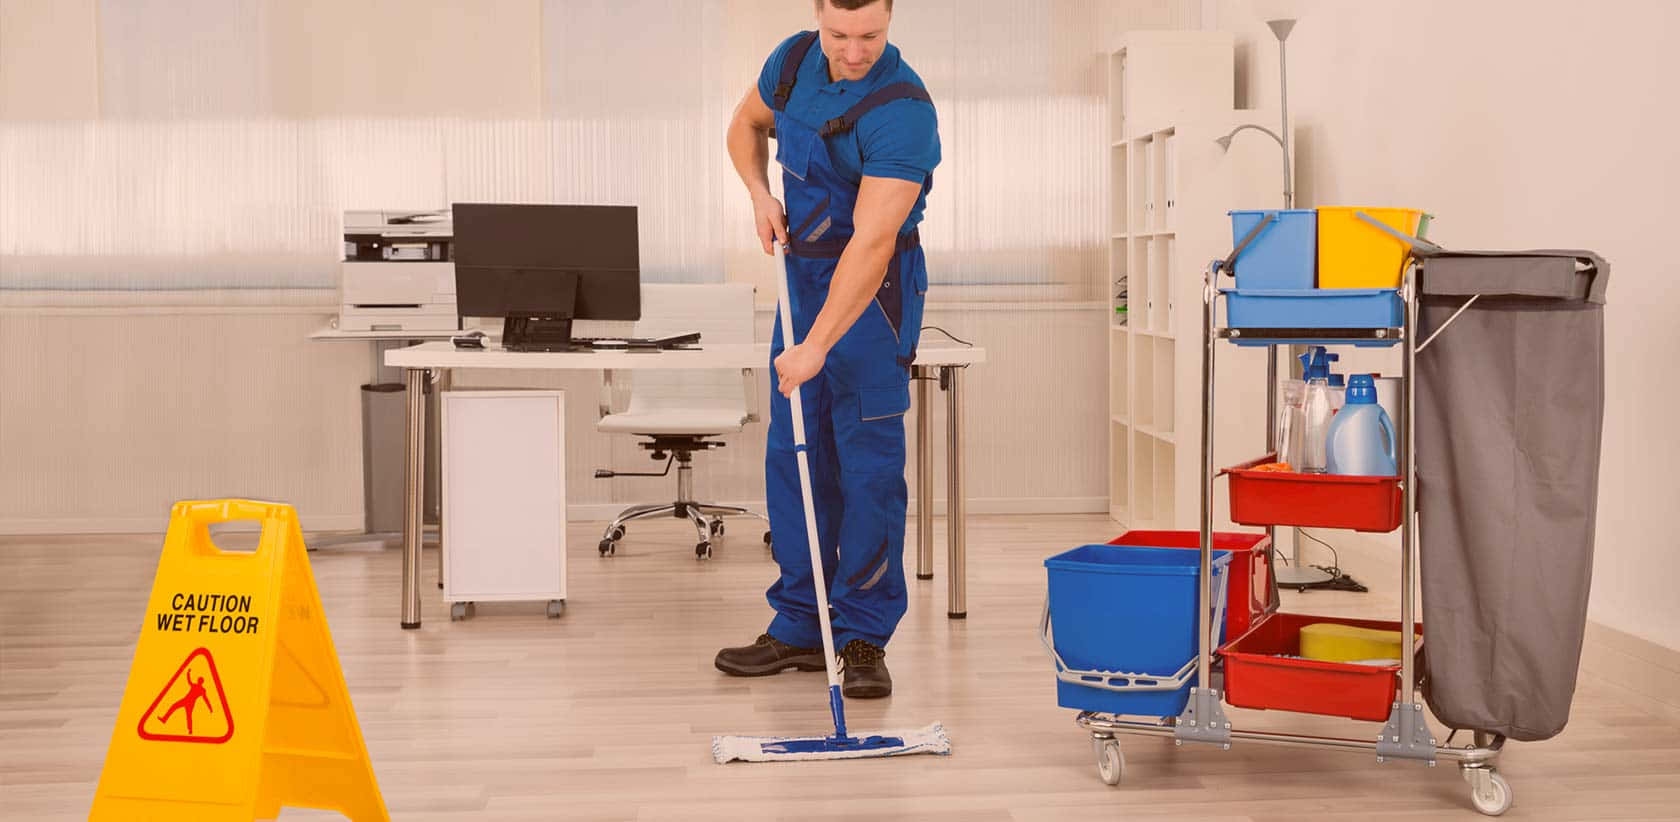 Worker Cleaning Services Background